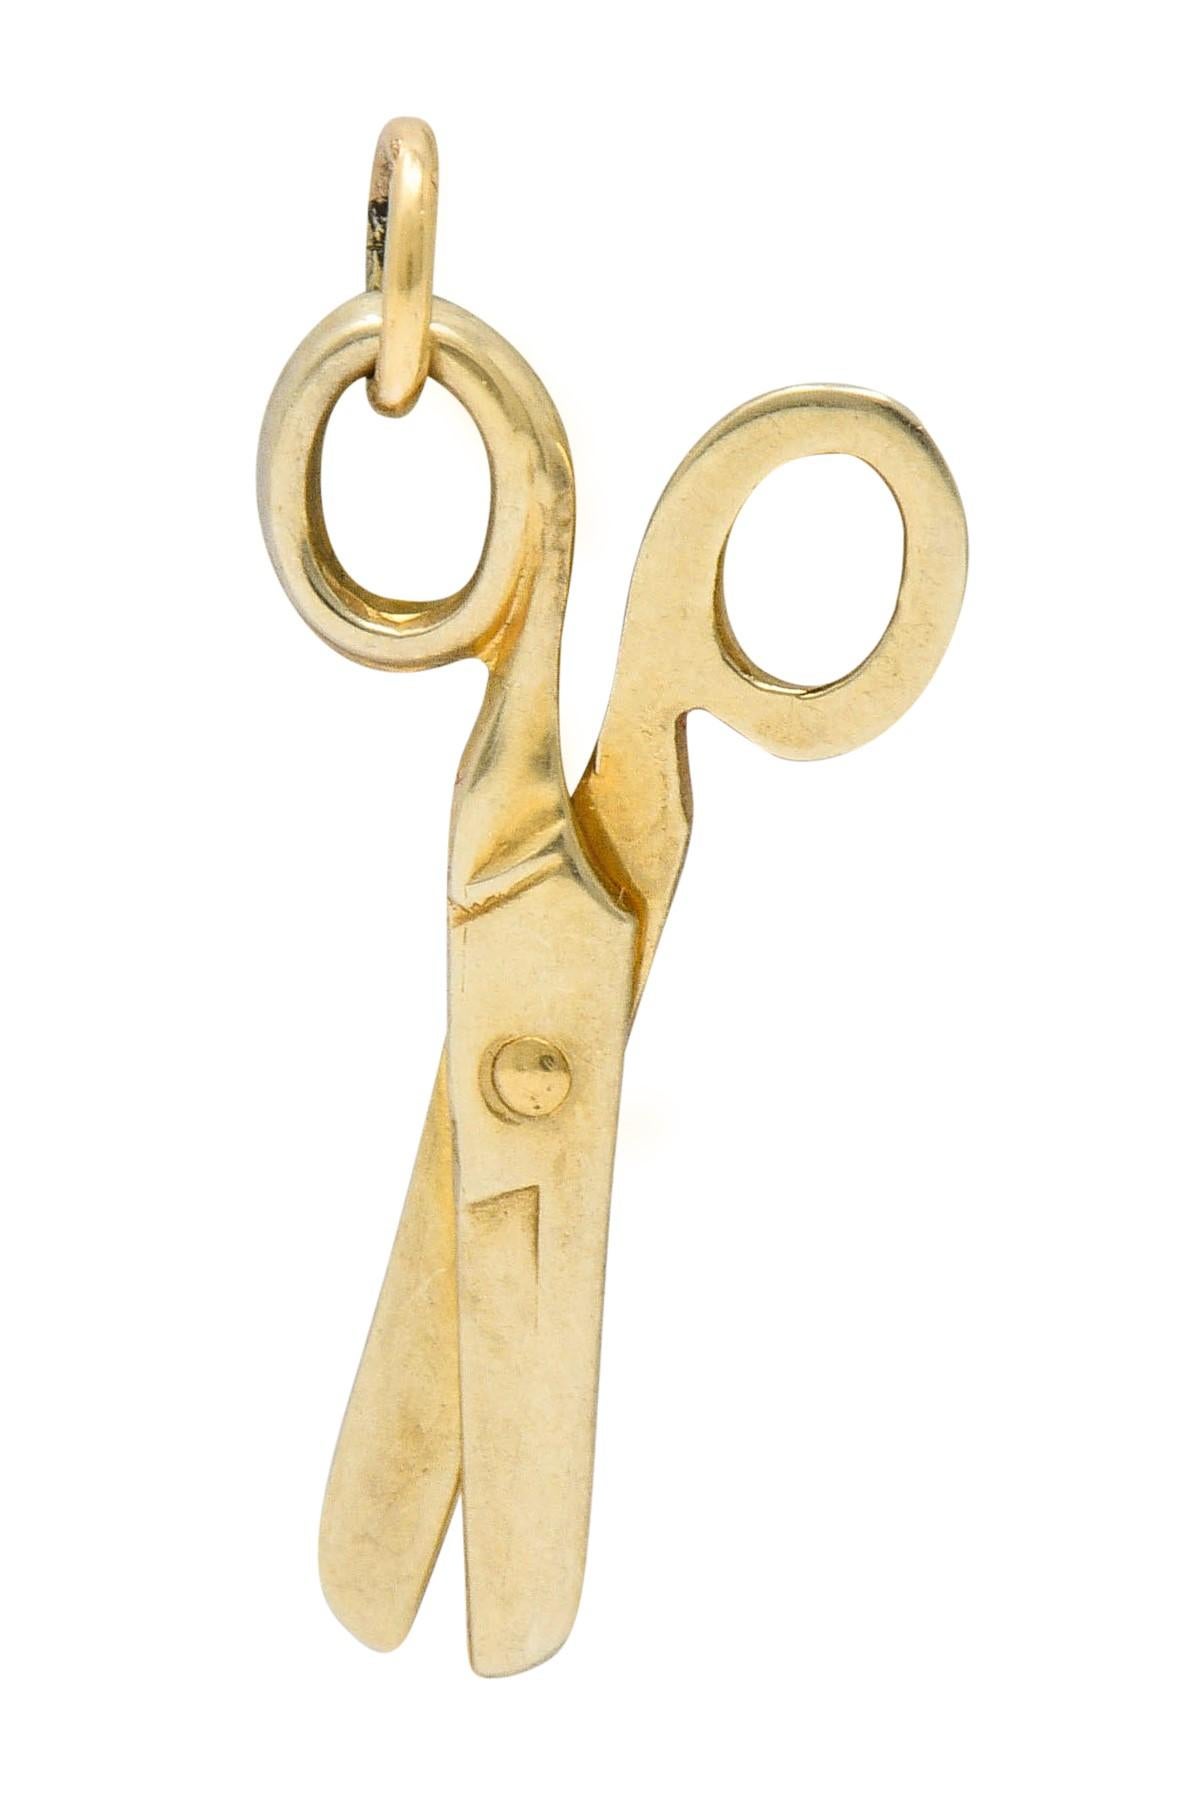 Designed as a pair of gold scissors

That pivot open and closed

Completed by a jump ring bale

Stamped 10K for 10 karat gold

Circa: 1940s

Measures: 7/16 x 13/16 inch

Total weight: 1.0 gram

Functional. Sewing. Shears.
 

Stock  Number: We-6005